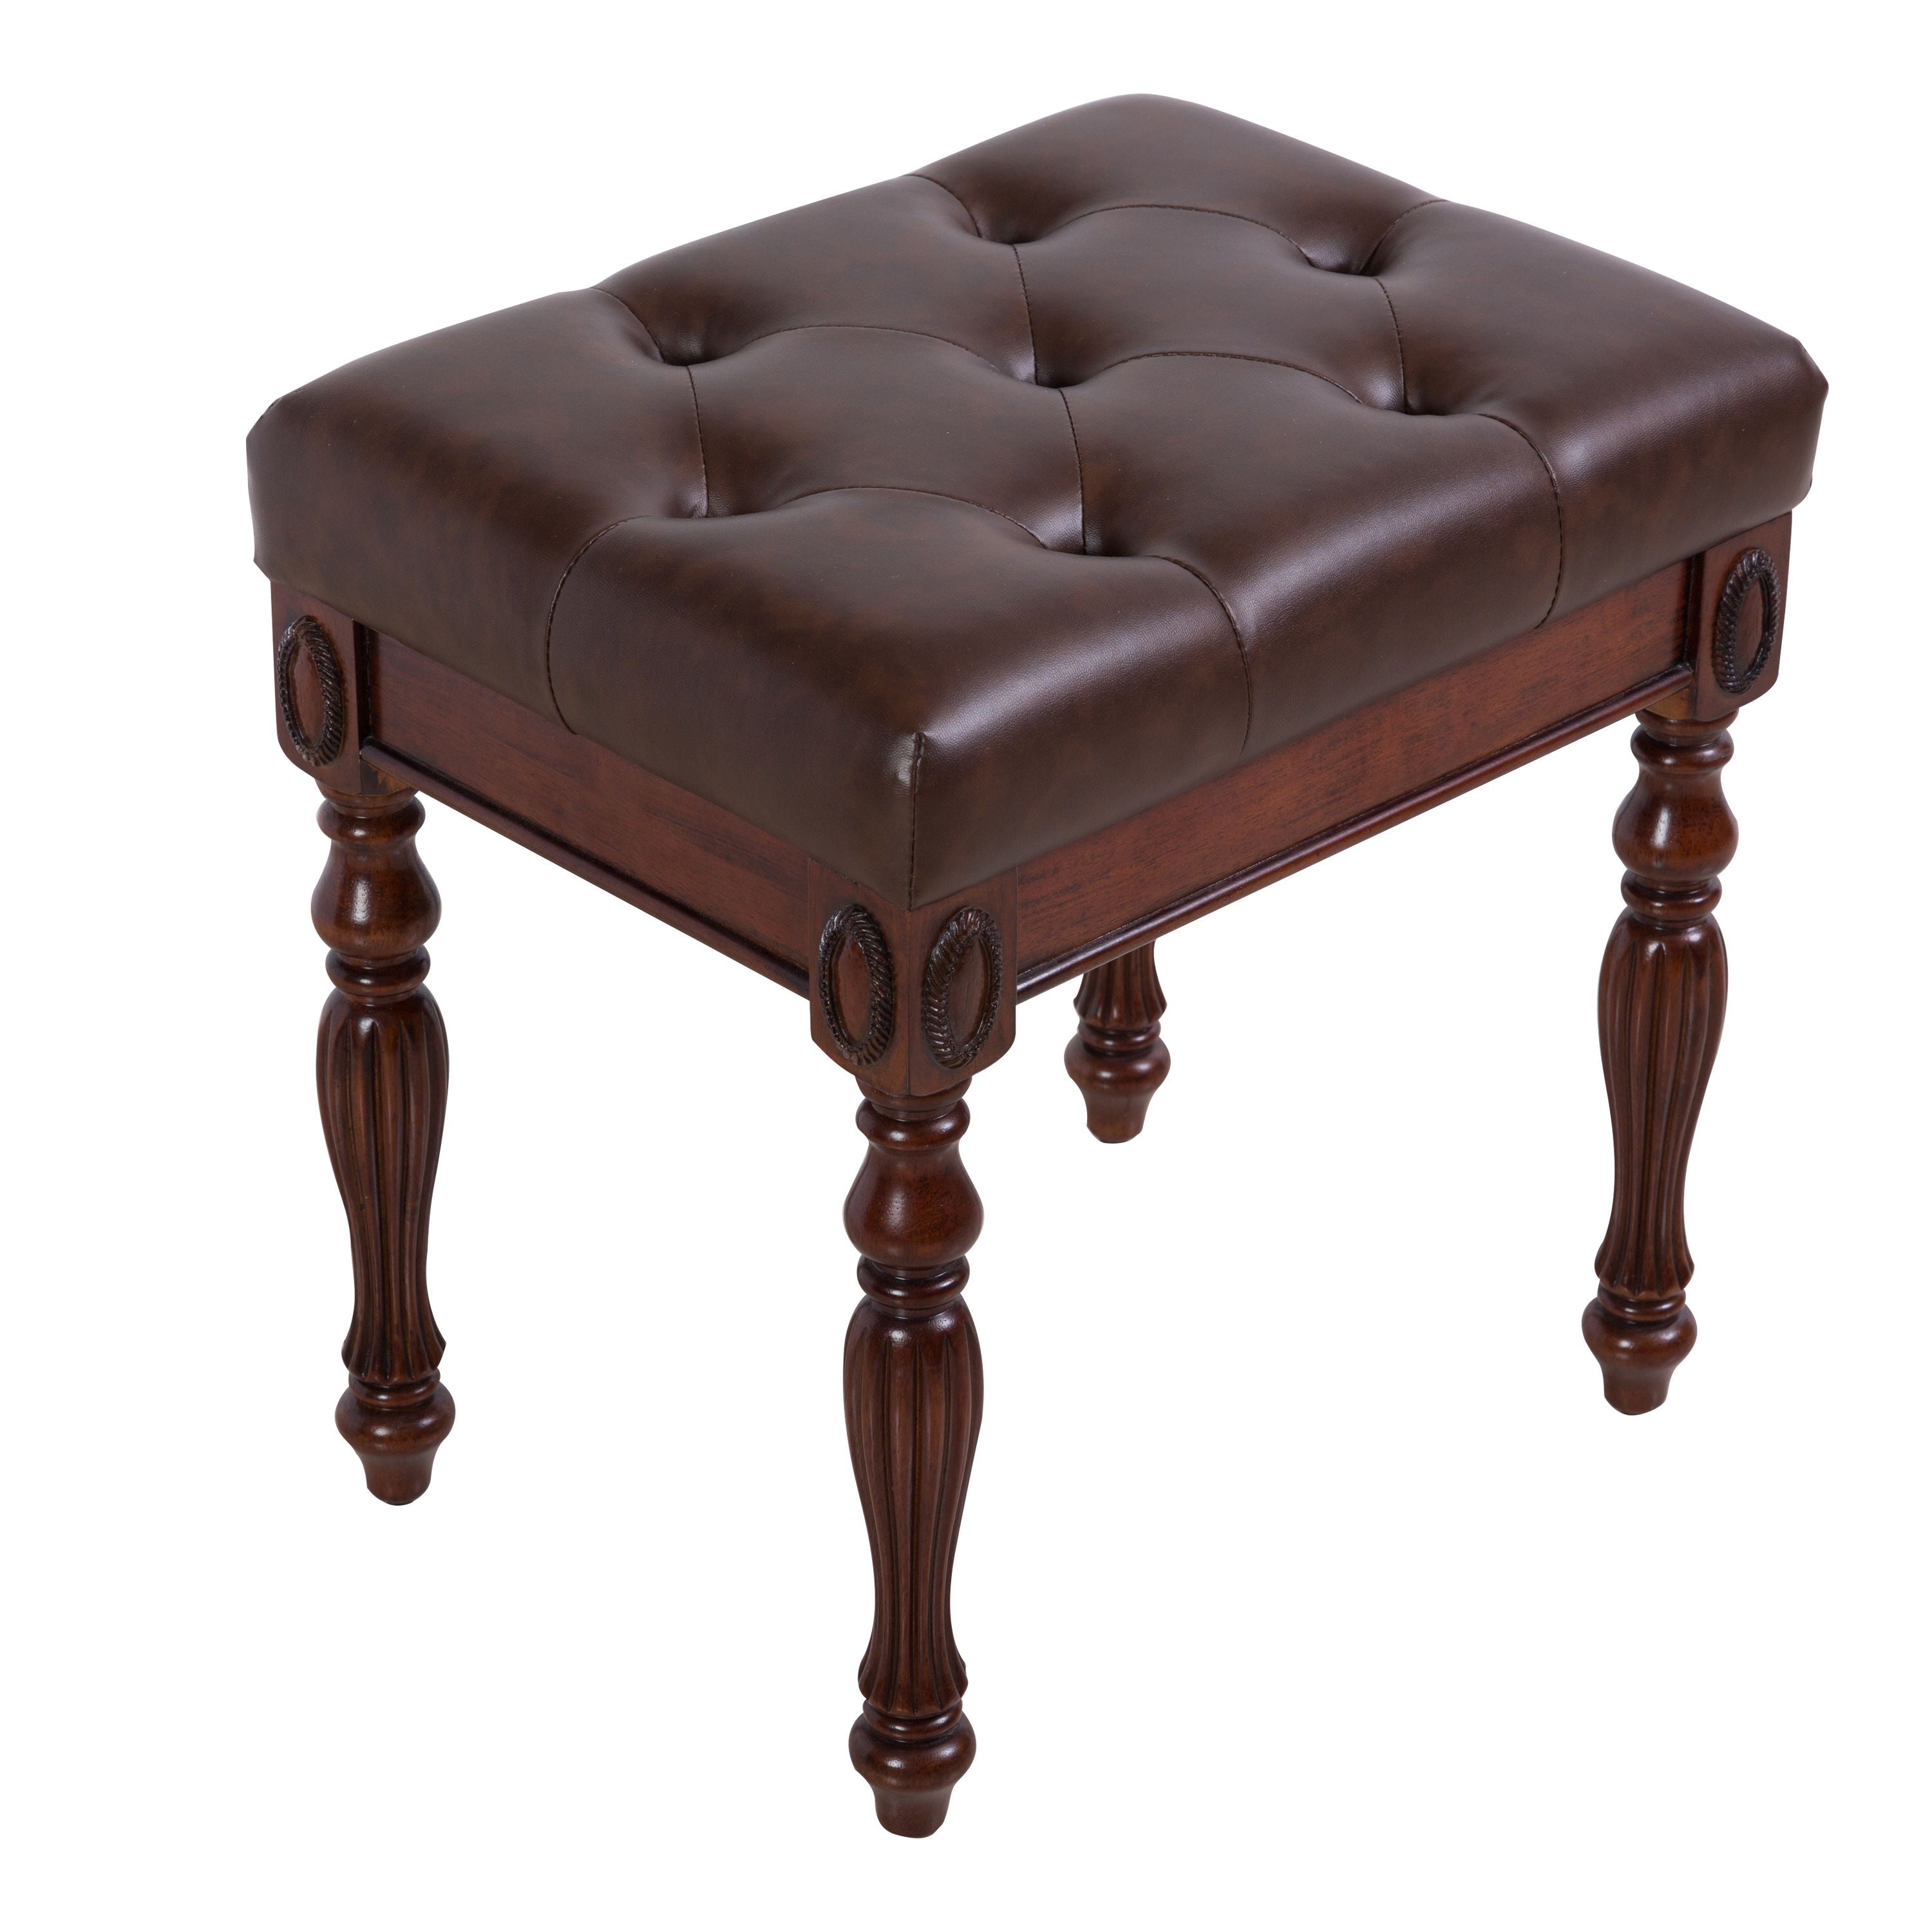 American Solid Wood High Elastic Shoe Changing Stool (Brown)